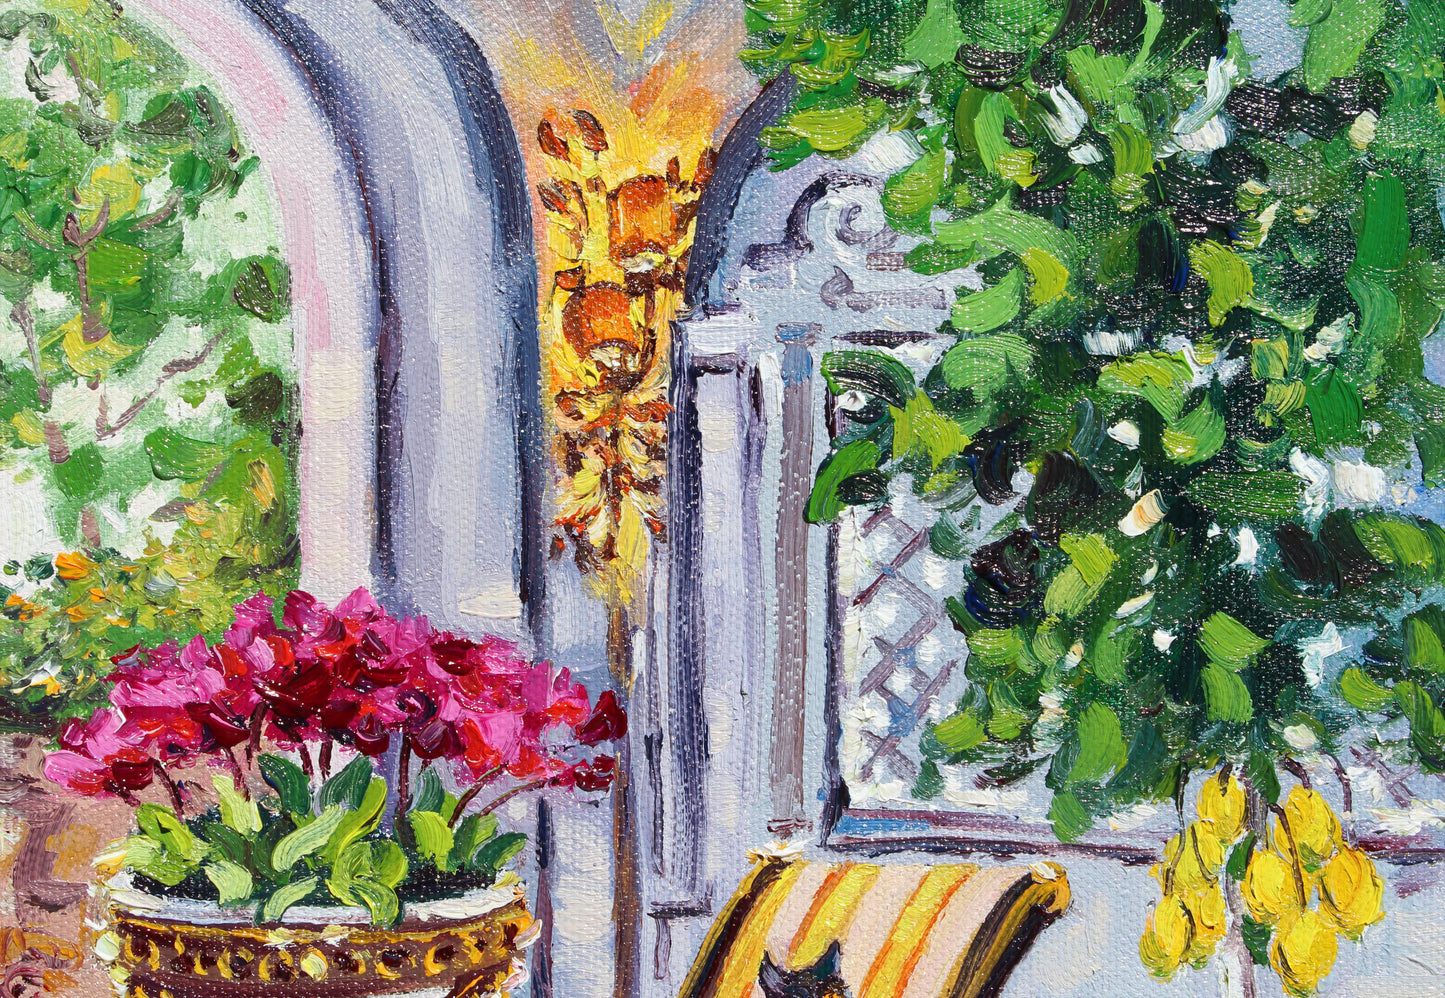 Villa di Roma, An Original Oil Painting On Canvas Of A Black Cat In A Garden Room